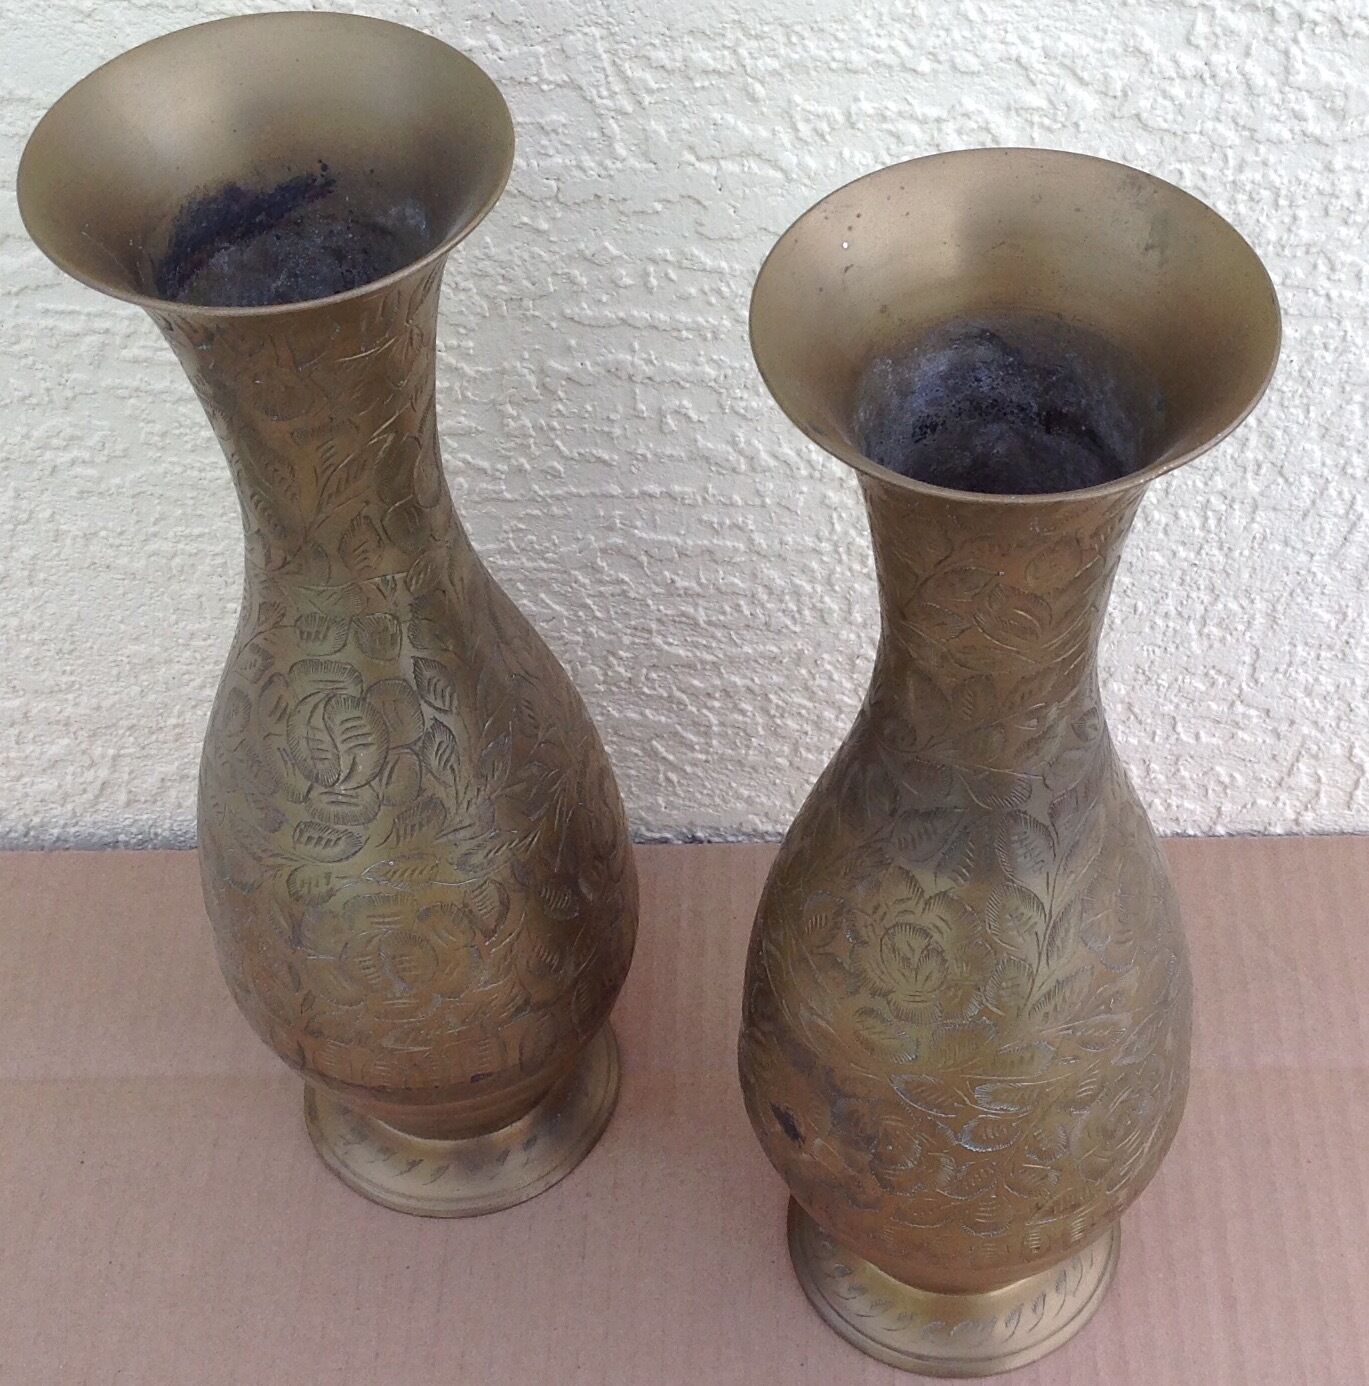 Brass India Vase pair identical, 20th century Anglo, engraved bohemian 225-BF  Без бренда